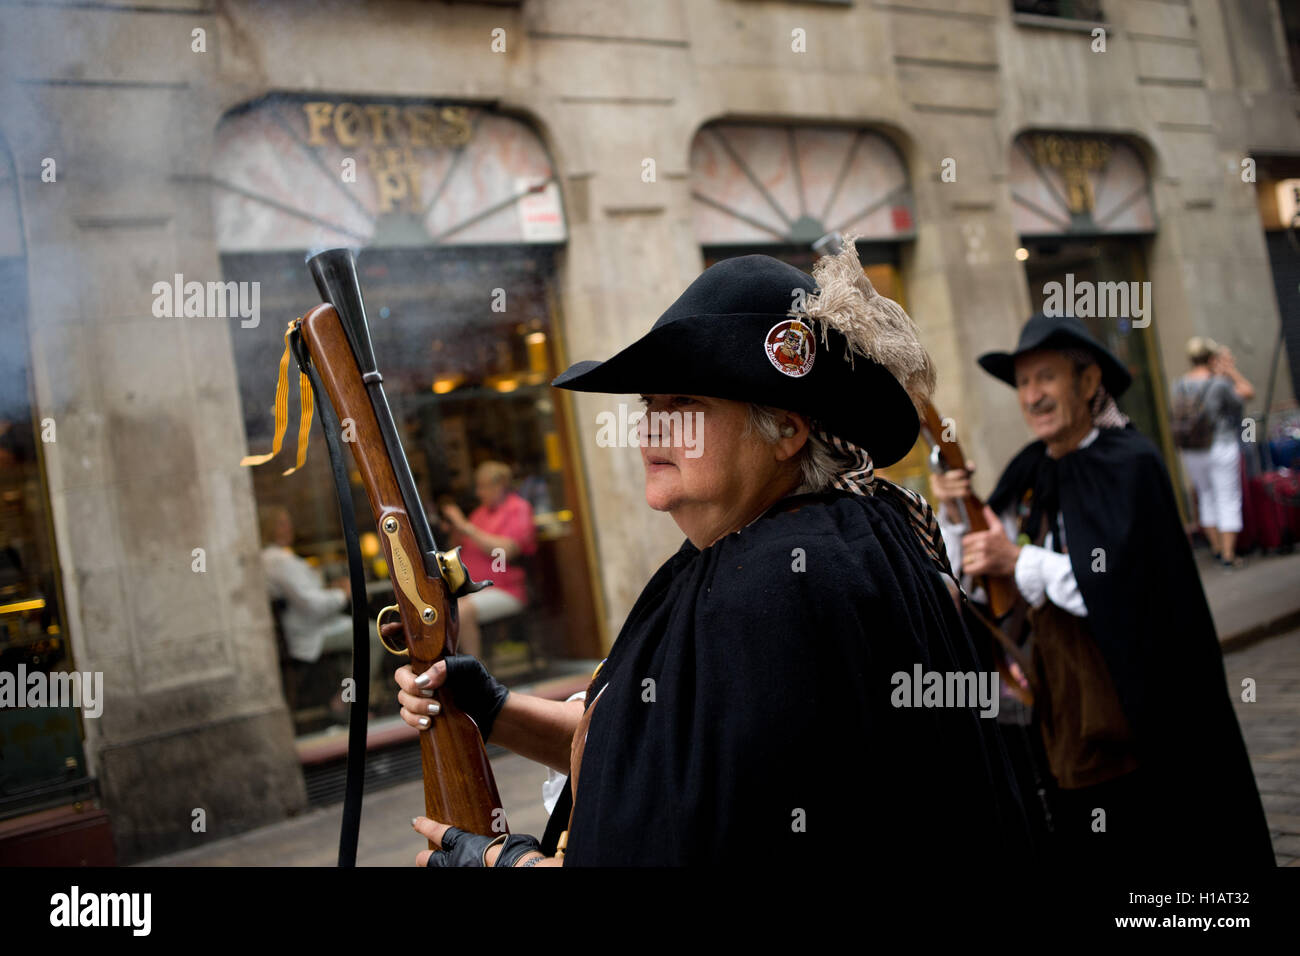 Barcelona, Catalonia, Spain. 24th Sep, 2016. Trabucaires through the streets of Barcelona early in the morning on the occasion of the celebrations of the Merce Festival (Festes de la Merce). The Galejada Trabucaire marks the beginning of the day of the patron saint of Barcelona, La Merce. Men and women dressed as ancient Catalan bandits take to the streets of the old part of Barcelona and cause a loud noise with his blunderbusses full of gunpowder. © Jordi Boixareu/ZUMA Wire/Alamy Live News Stock Photo